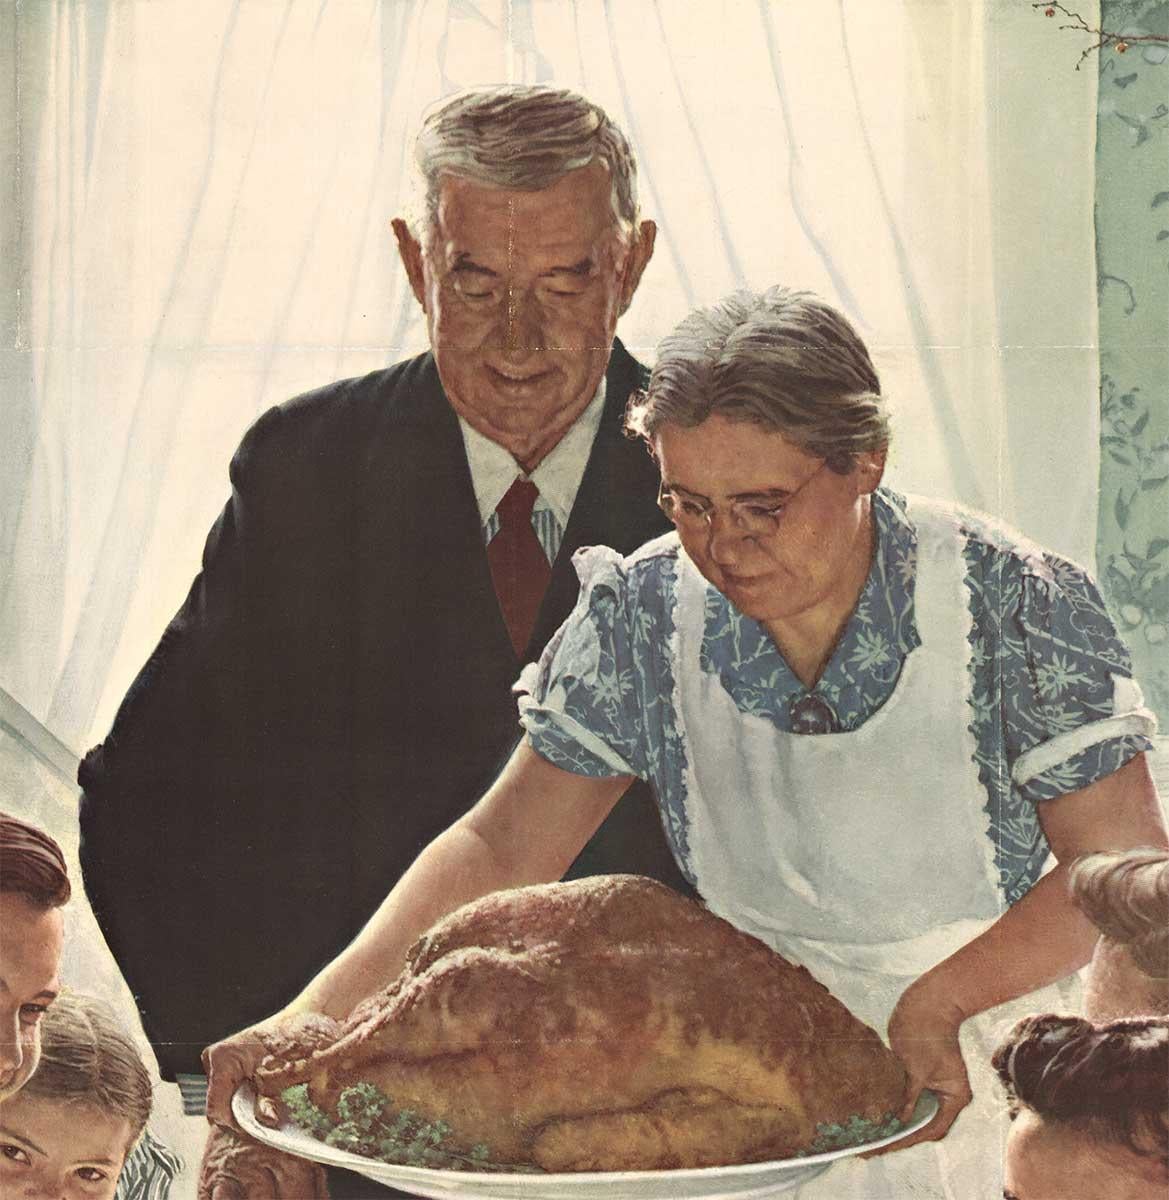 Original Freedom from Want 1943 vintage poster.   Thanksgiving - Print by Norman Rockwell